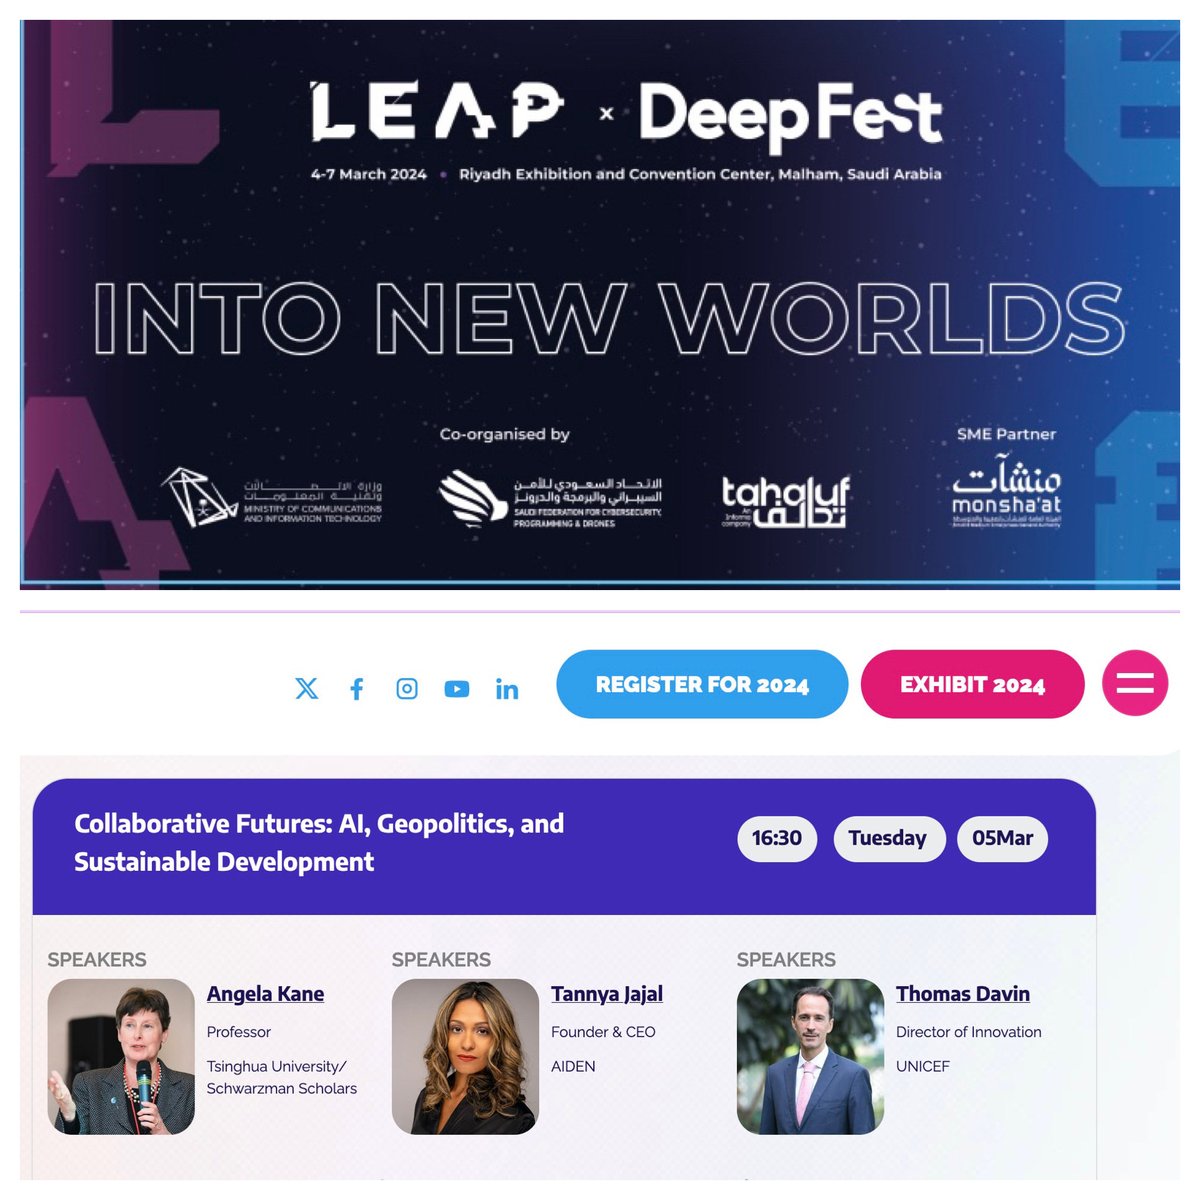 Heading to Riyadh today to participate in ⁦@deepfestai⁩. Presenting on Collaborative Futures: AI, Geopolitics and Sustainable Development on 5 May on the Main Stage. Look forward to meeting AI experts and the AI community, always exciting to learn of latest developments.